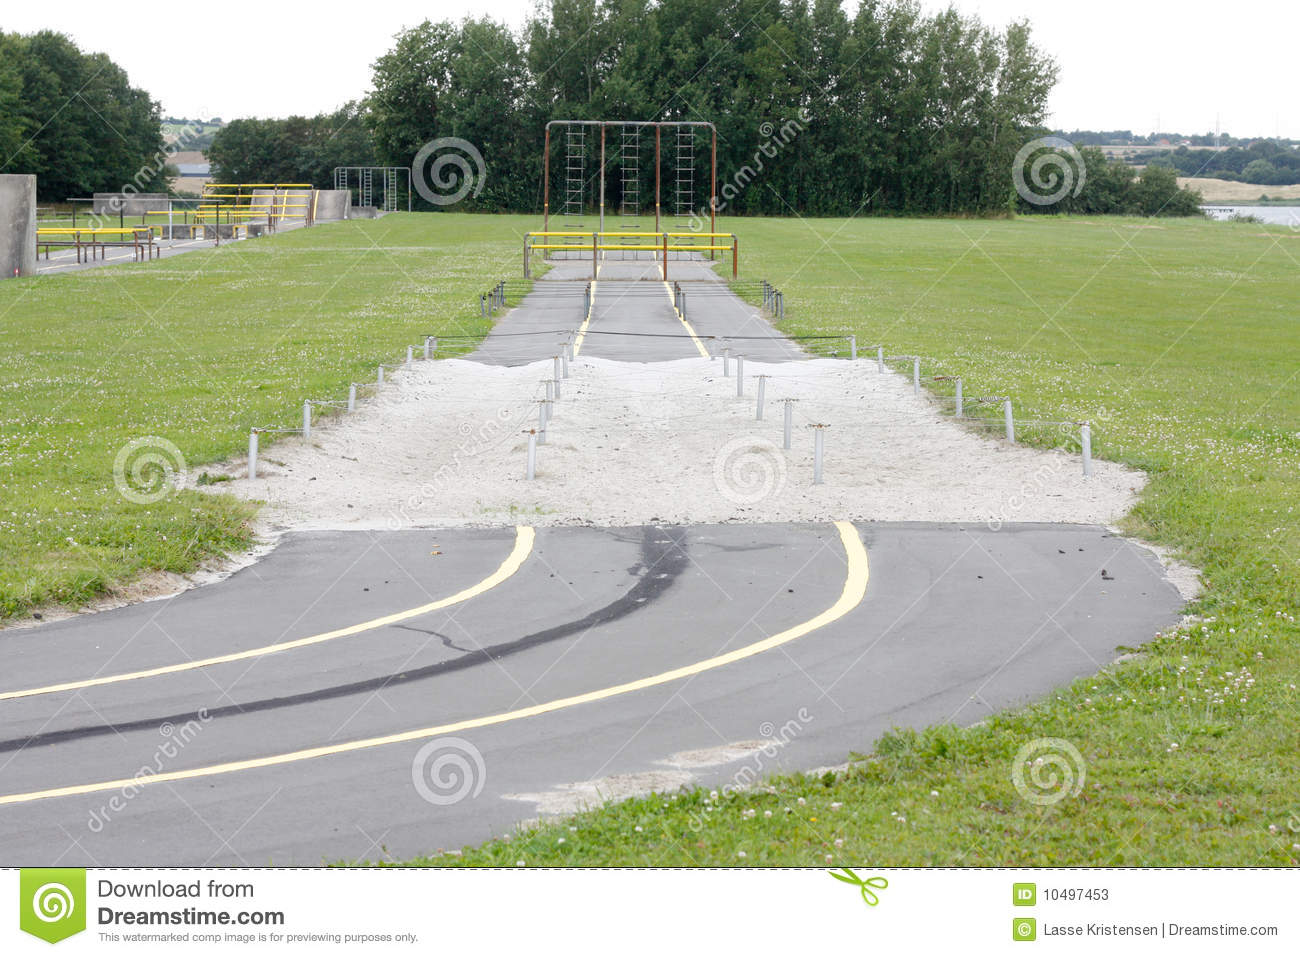 Obstacle Course Stock Photos   Image  10497453